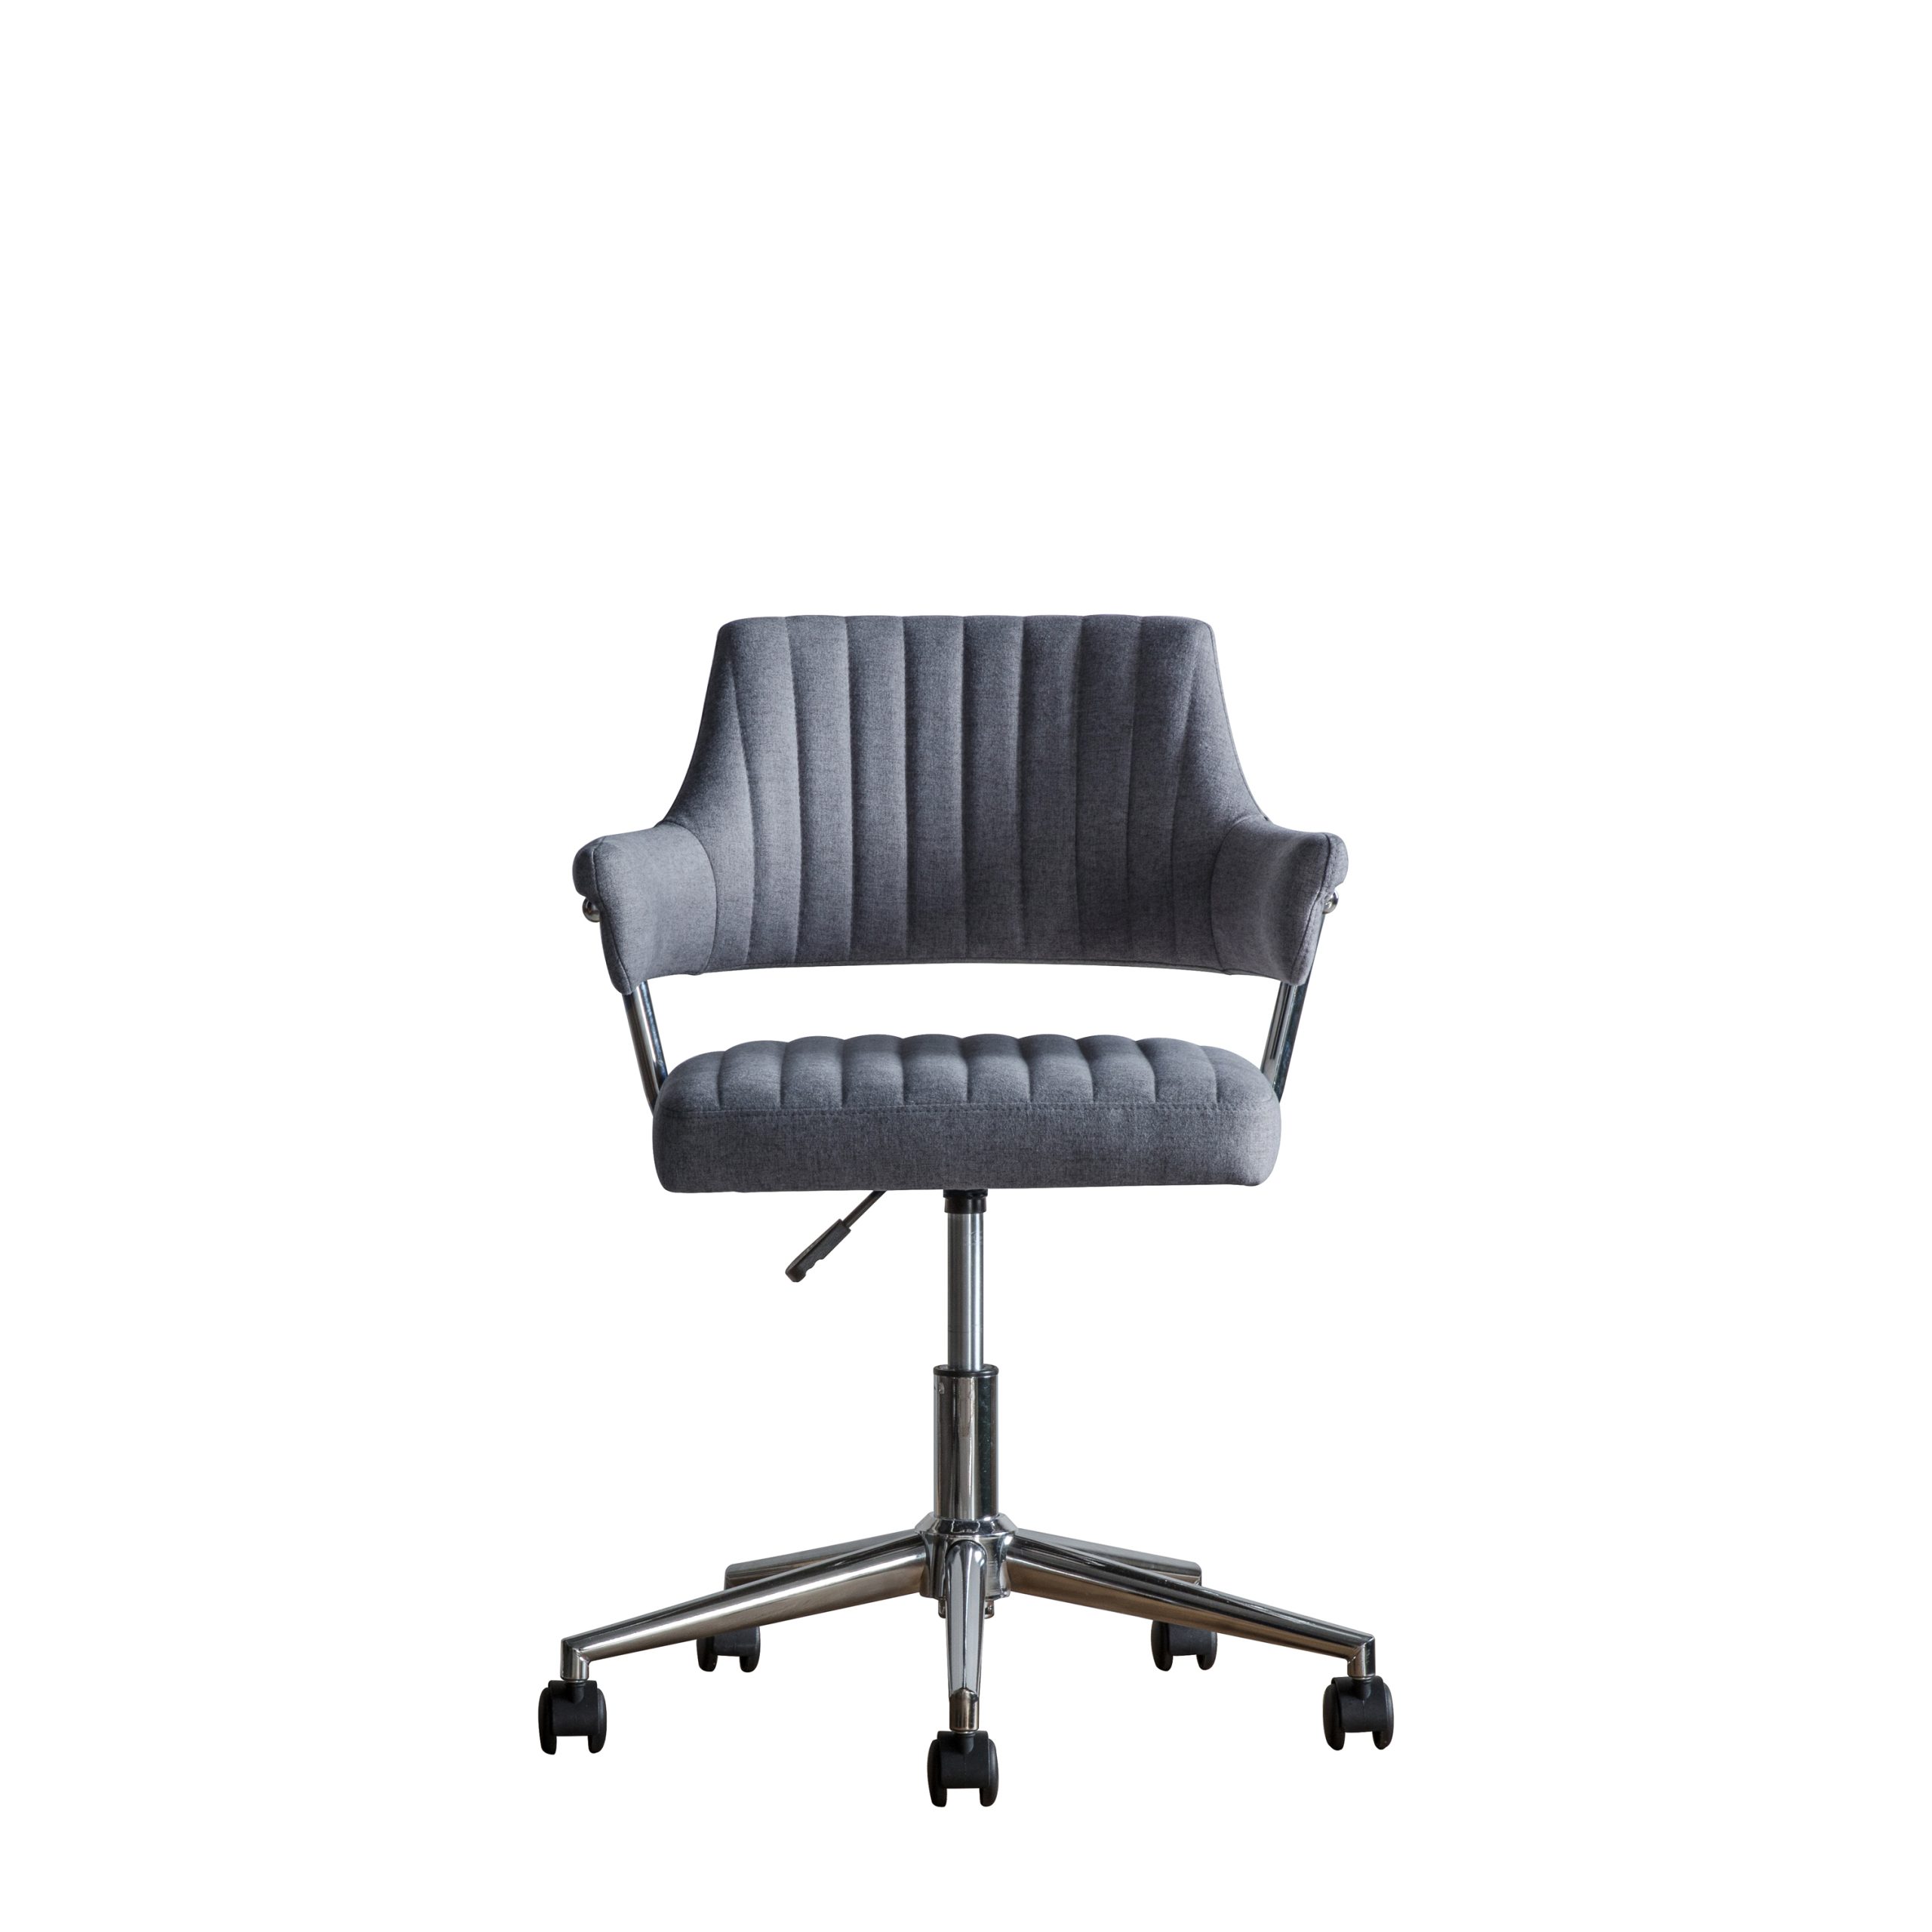 Gallery Direct Mcintyre Swivel Chair Charcoal